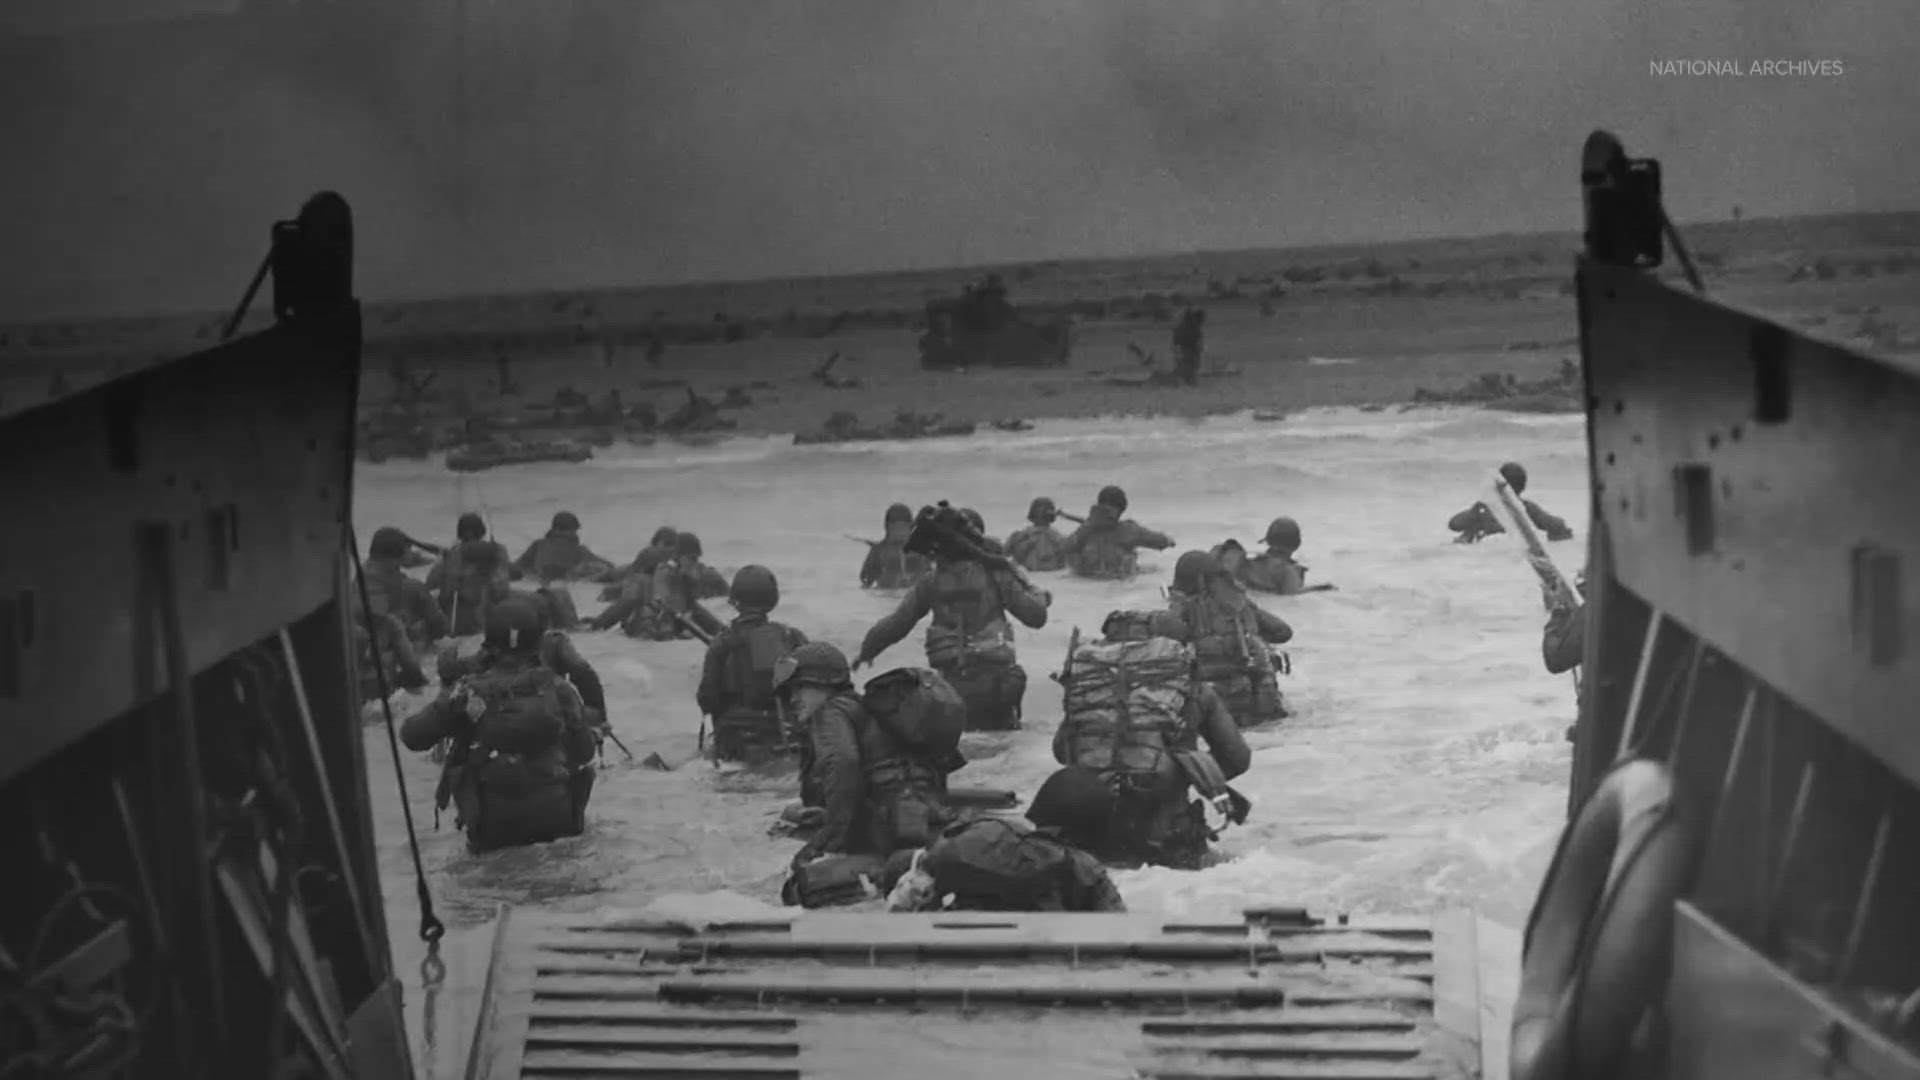 American troops and the Allied forces stormed the beaches of Normandy, France on June 6, 1944, to liberate Europe from Nazi, Germany during World War II.